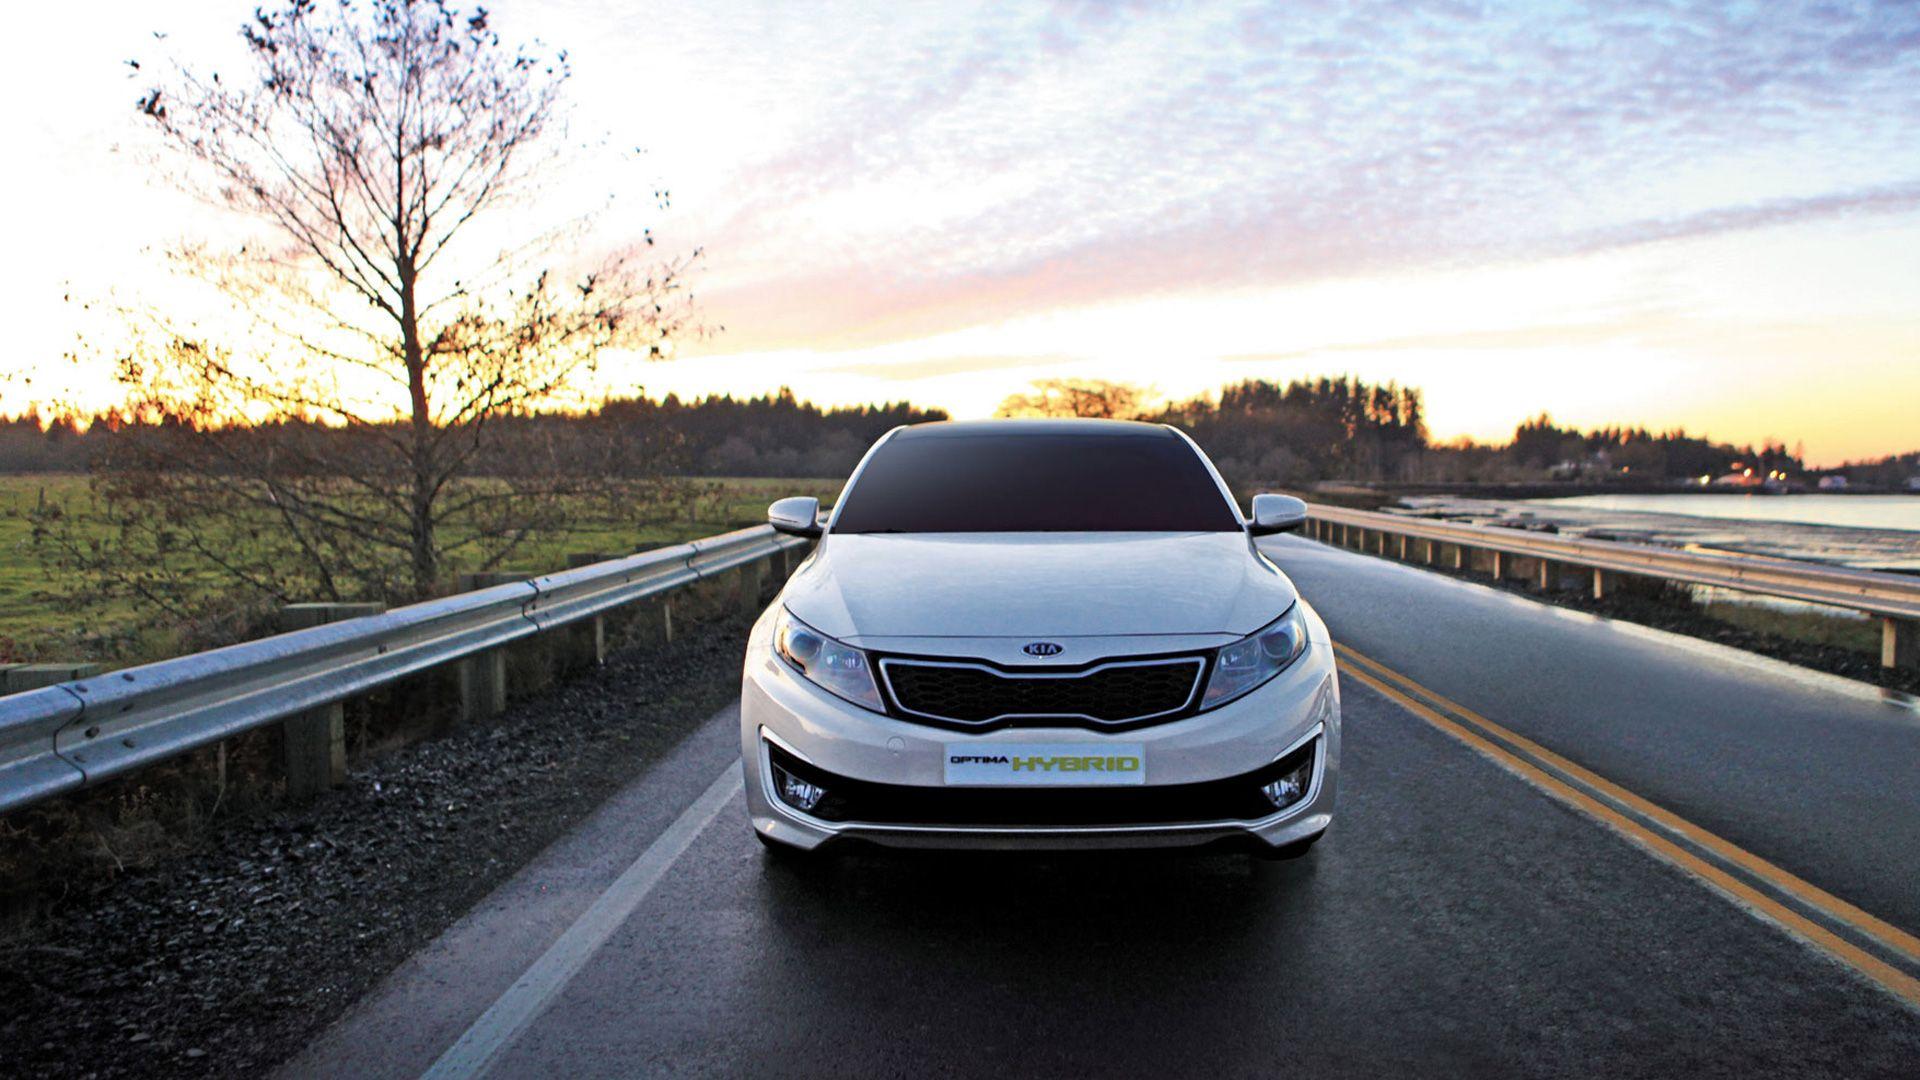 Front Pose of Kia Optima Hybrid On Highway Wallpapers